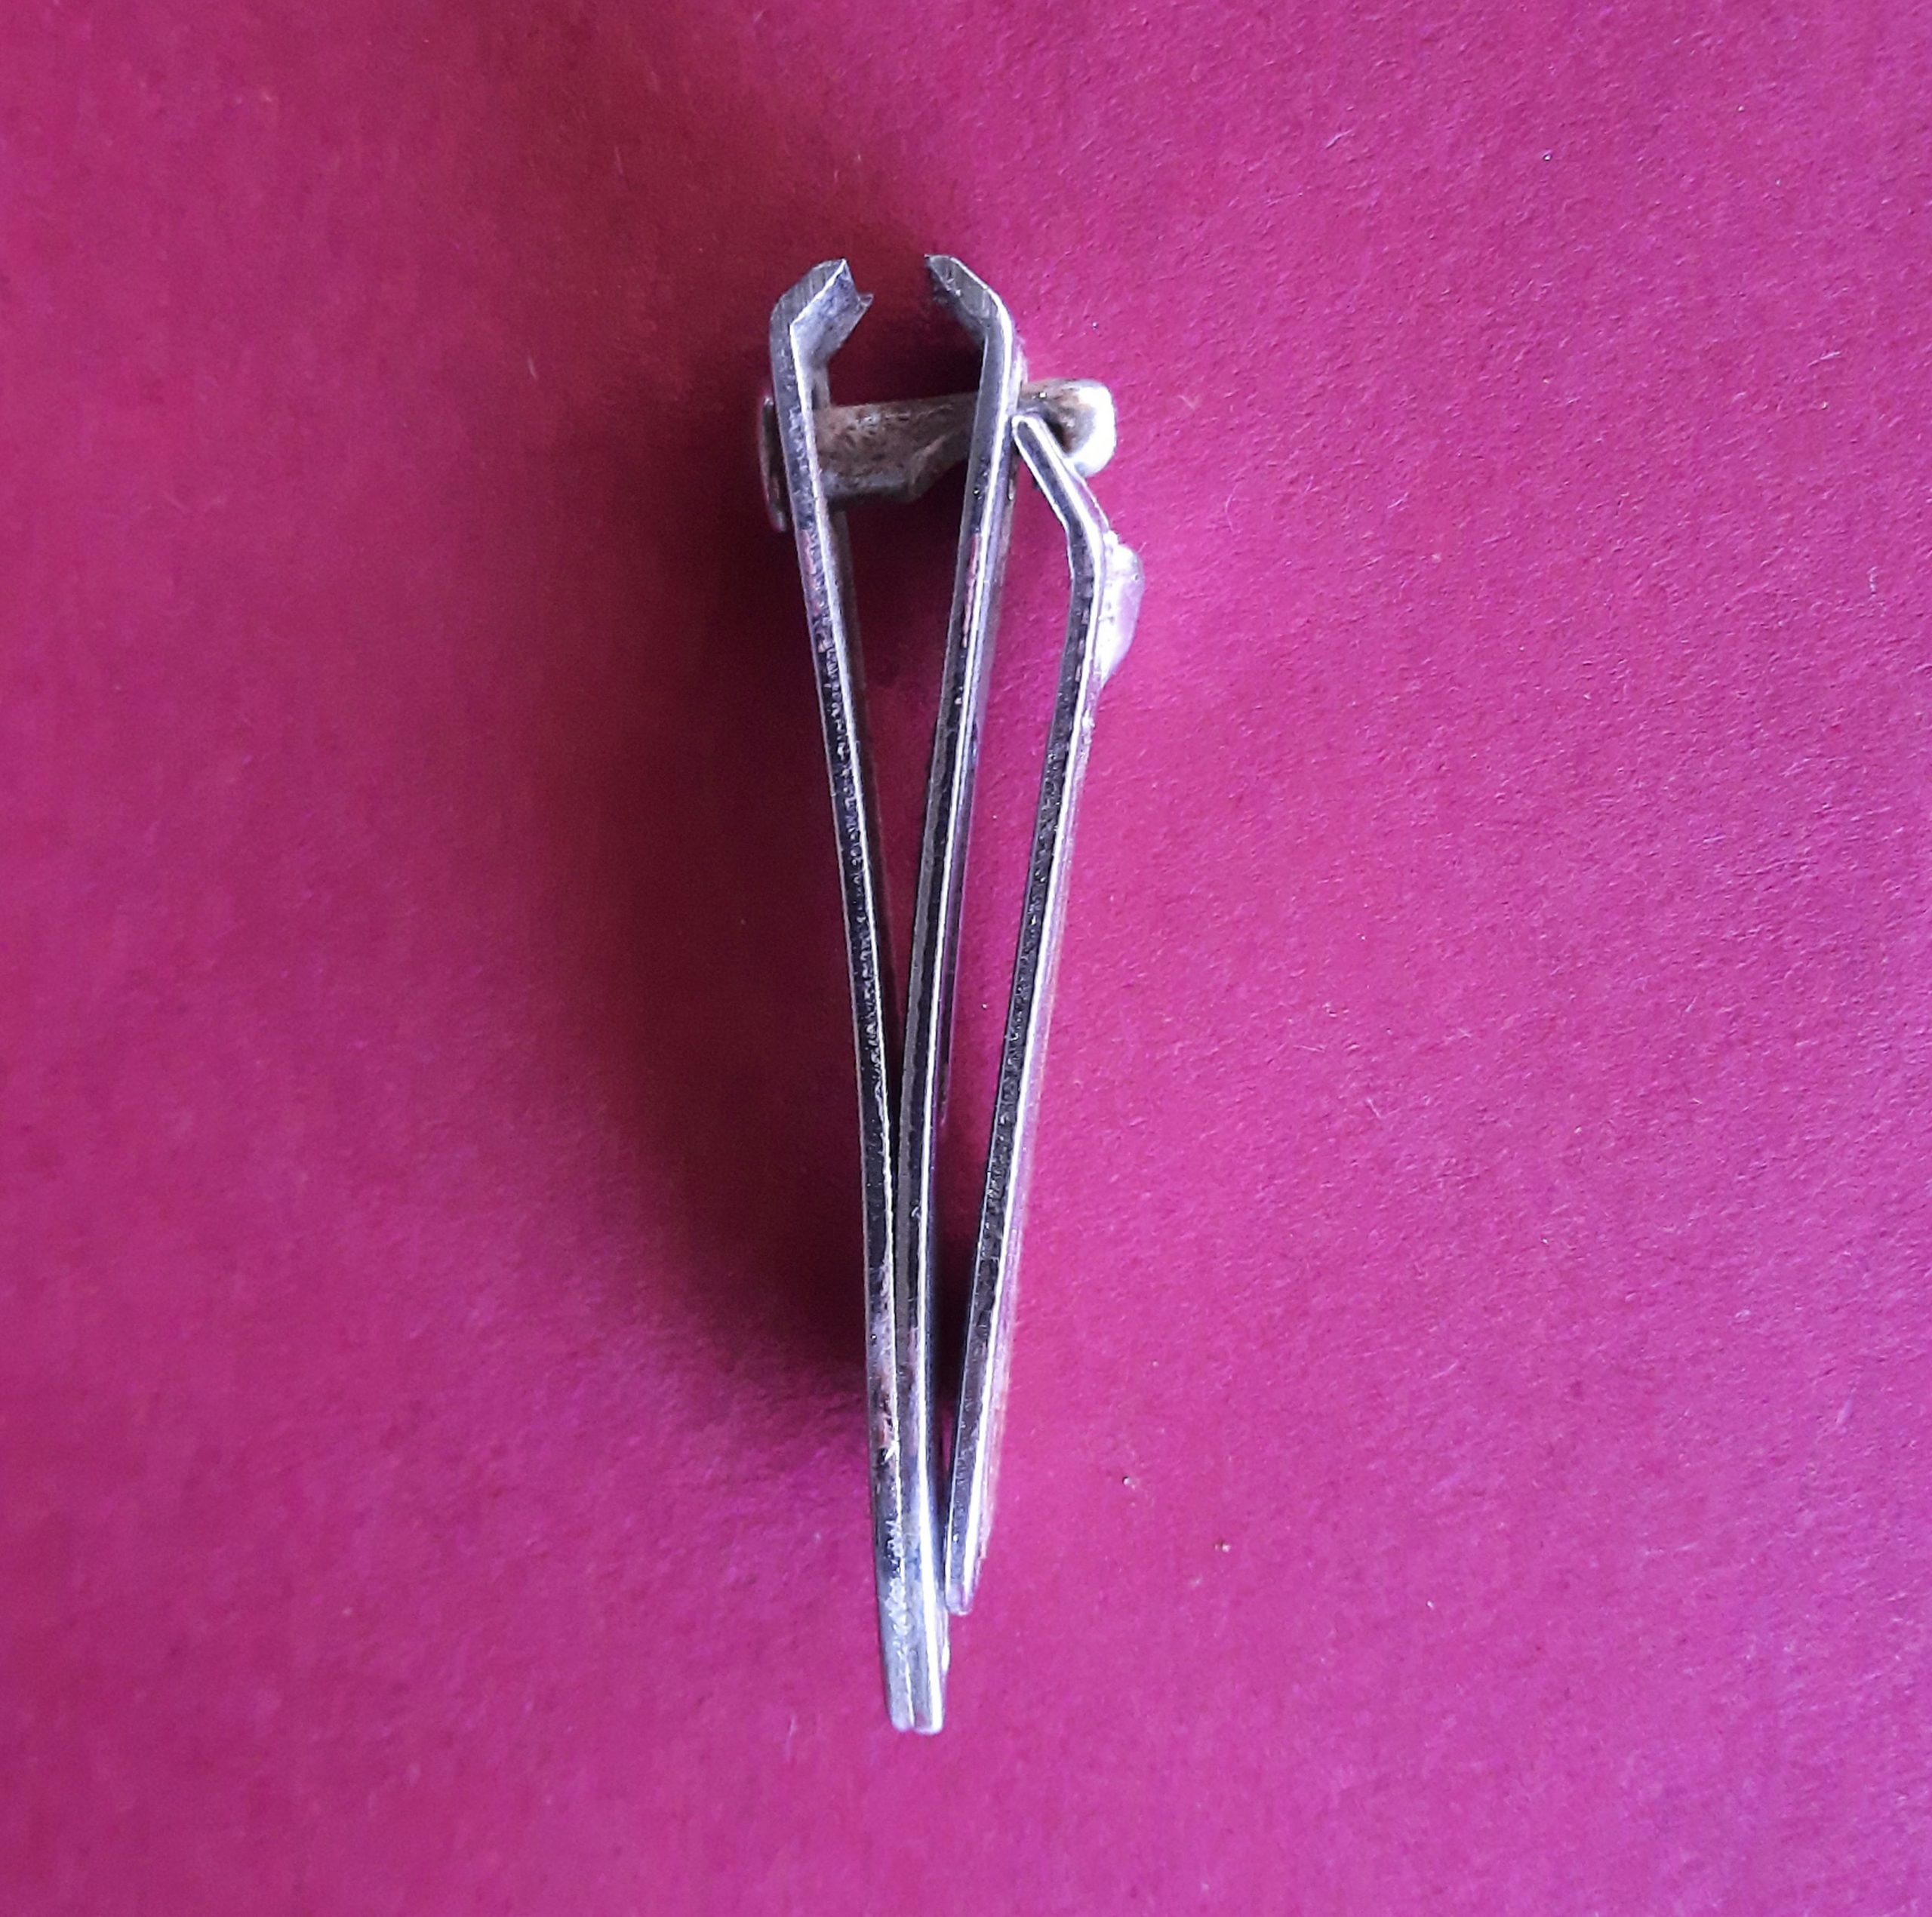 Nail cutter lying on a pink backgroung